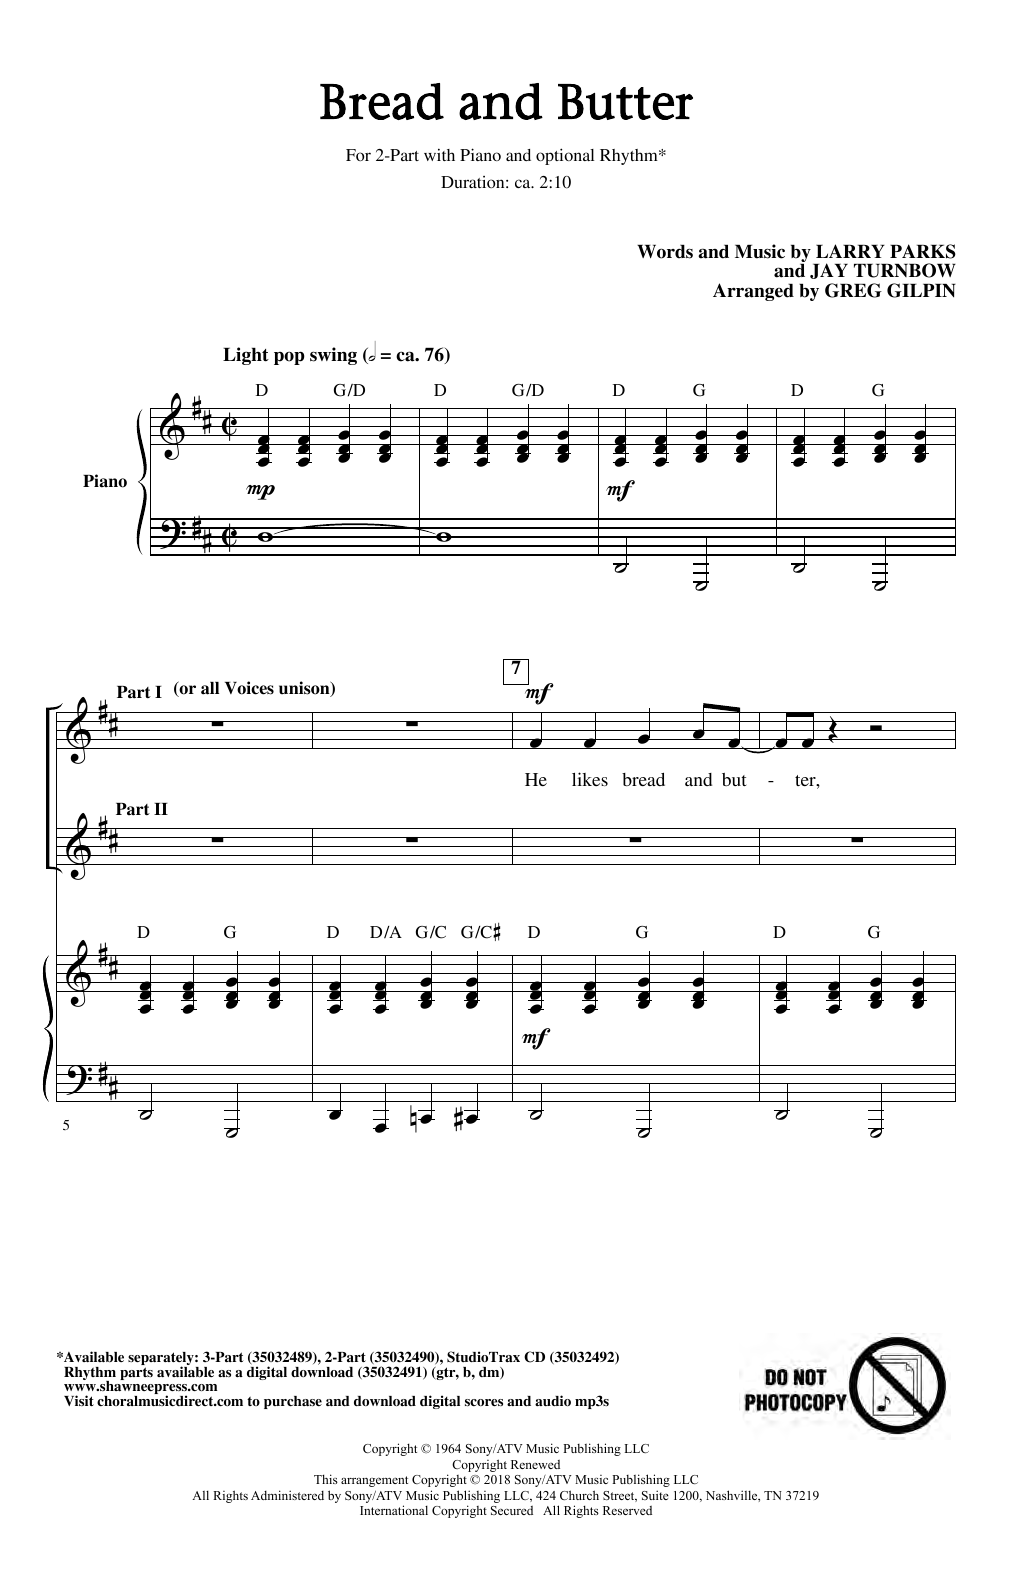 Download Larry Parks & Jay Turnbow Bread And Butter (arr. Greg Gilpin) Sheet Music